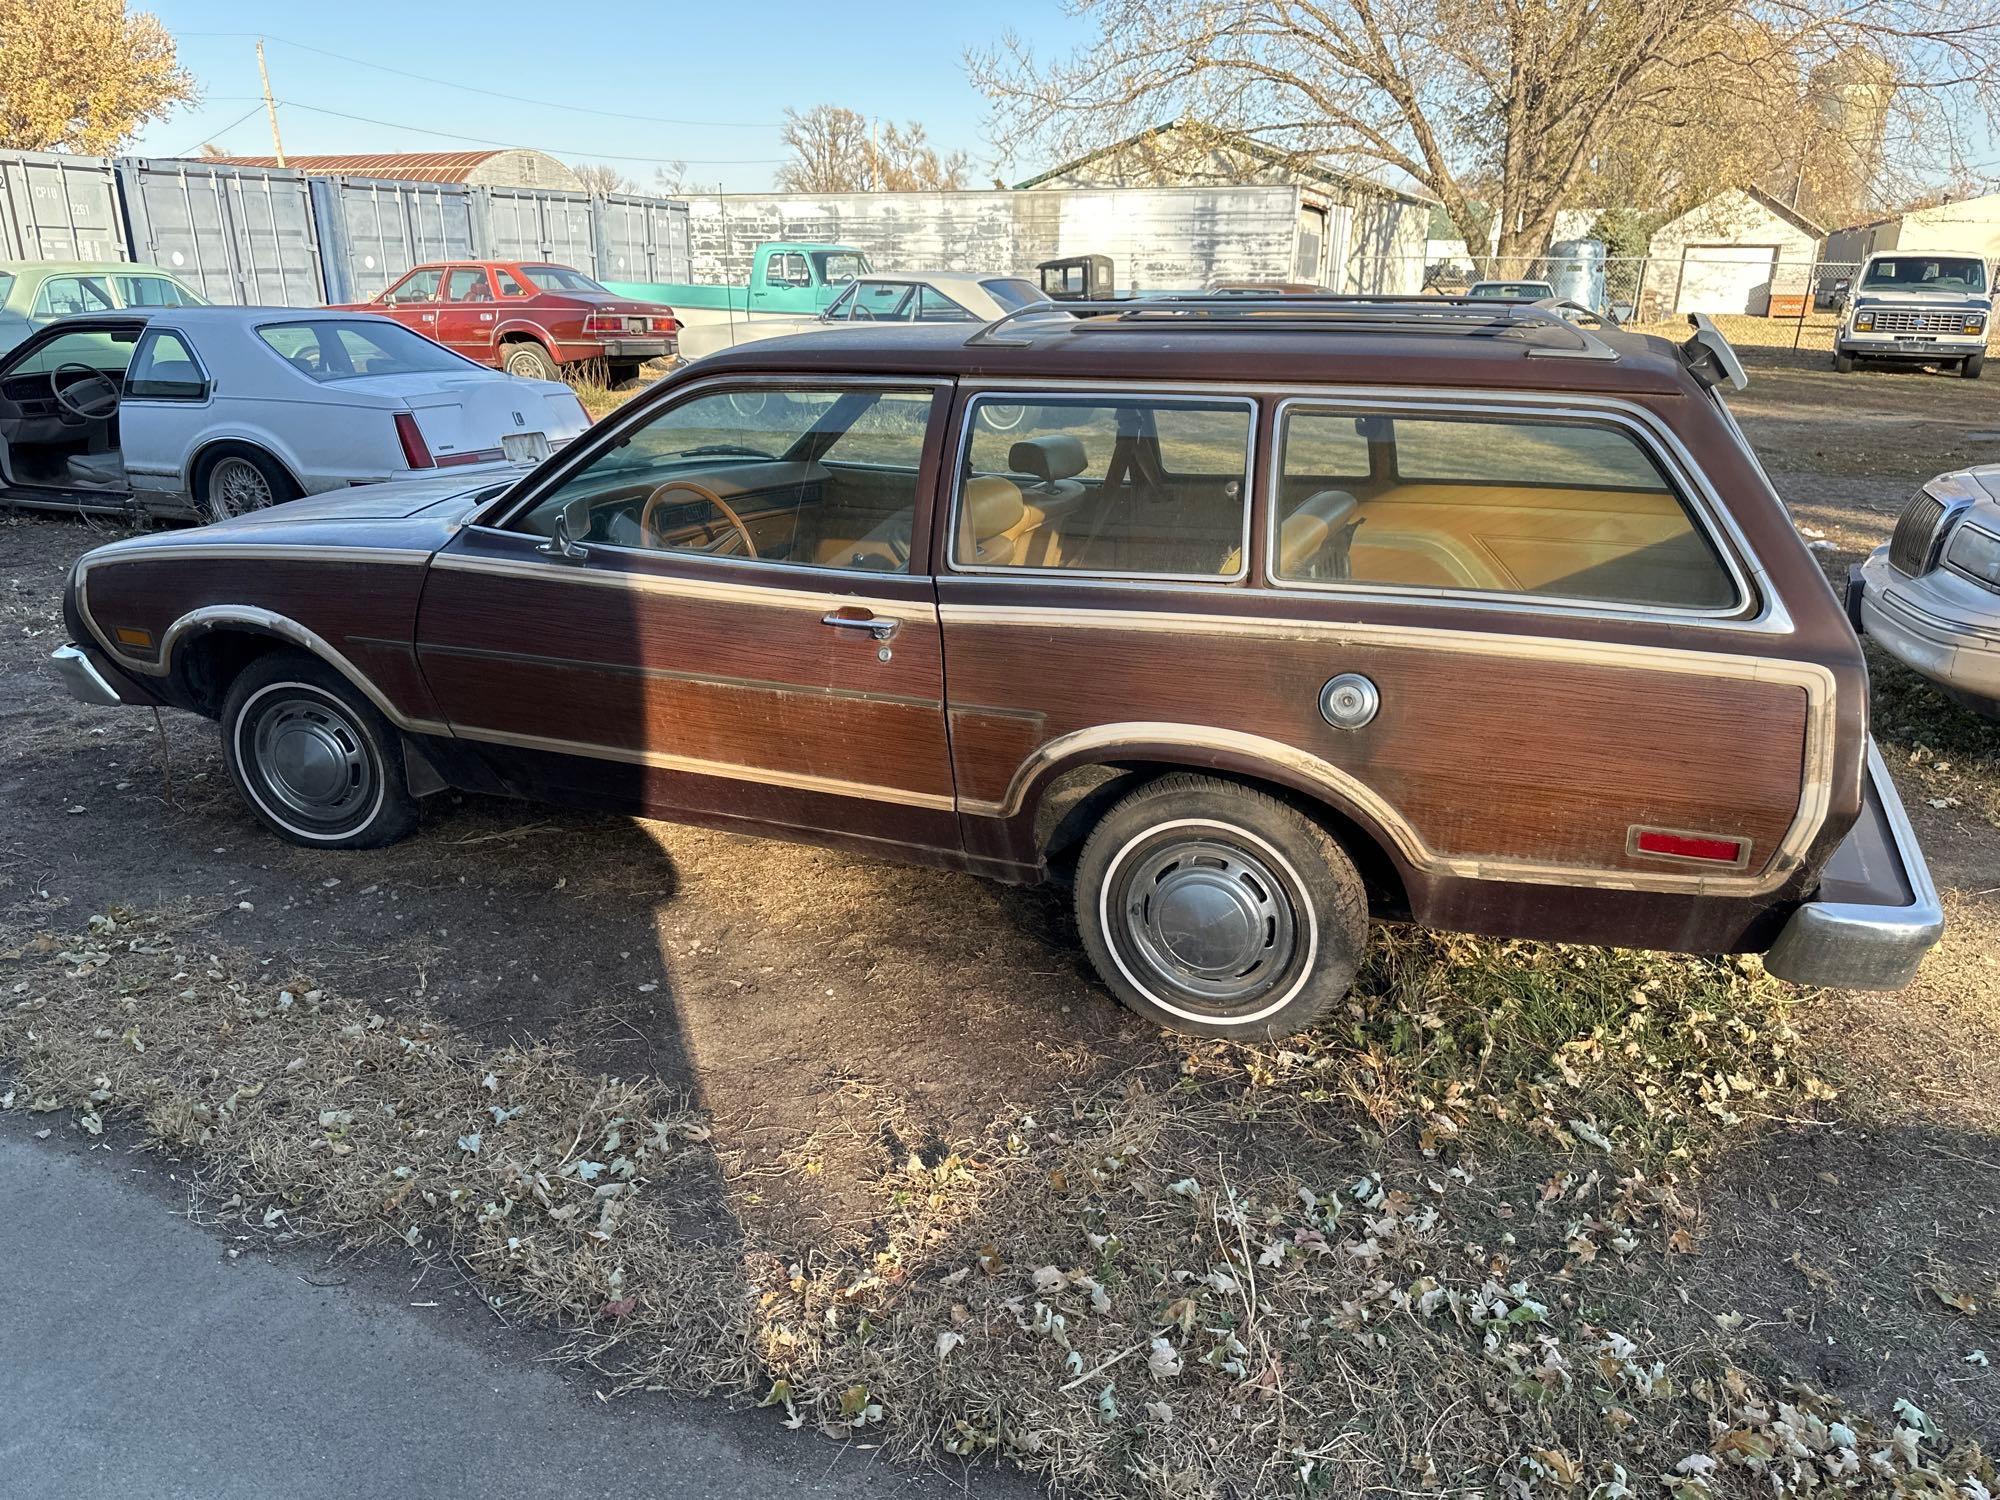 1978 FORD PINTO STATION WAGON, "ARNOLD PALMER OWNED", 65,985 MILES